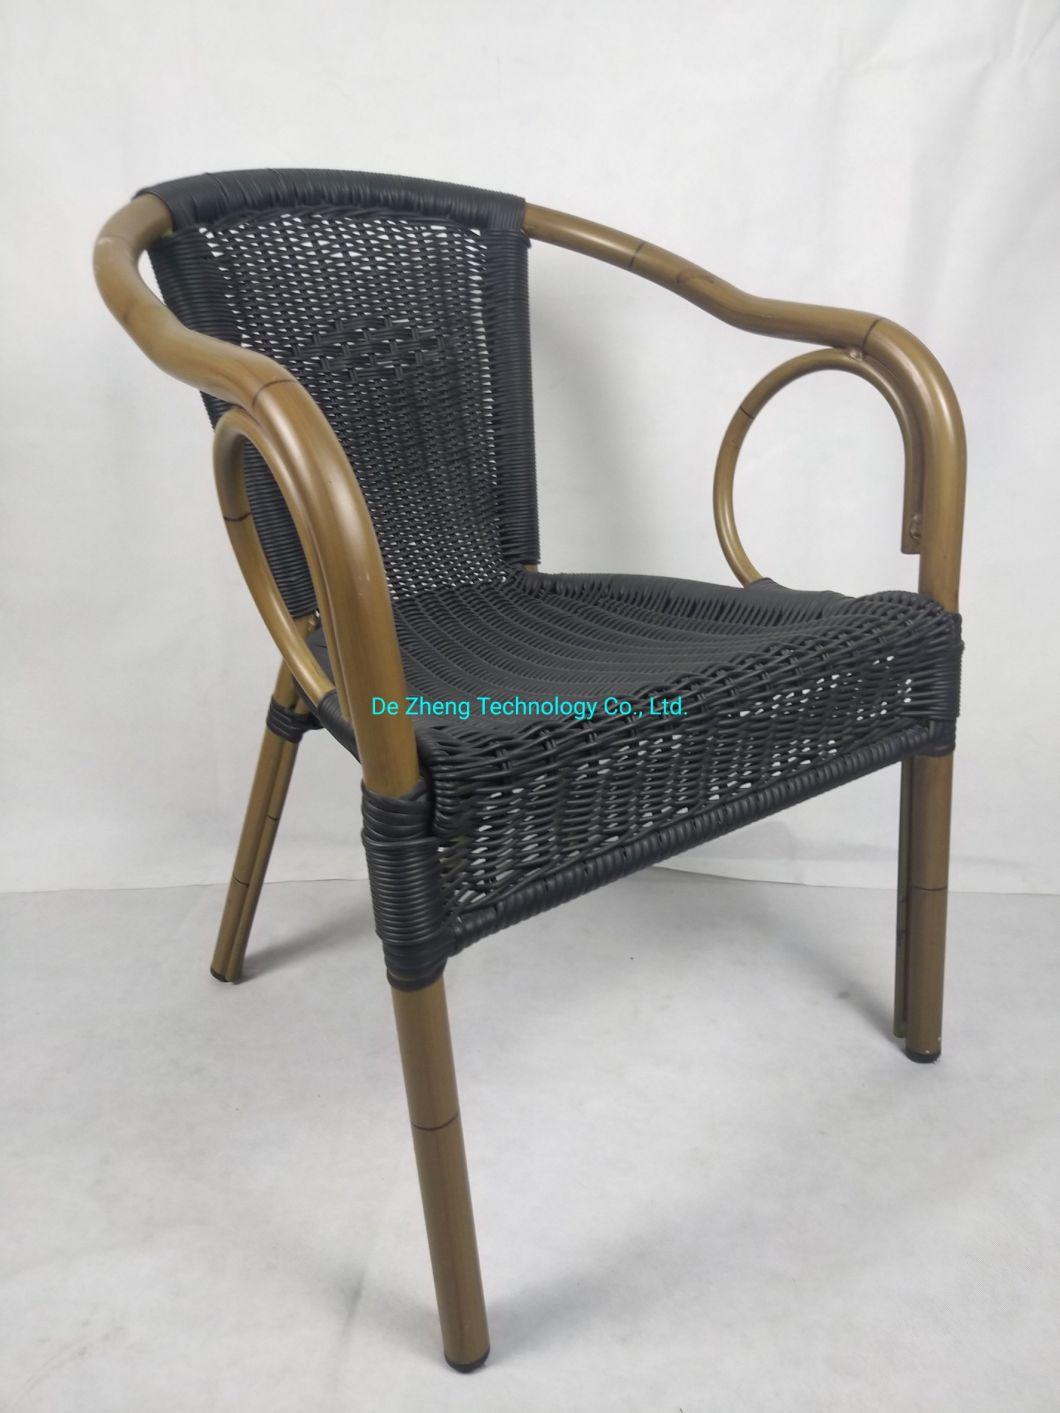 Paris Patio Garden Bistro Style Rain Resistance Rattan Dining Side Chair for Outdoor Restaurant Used